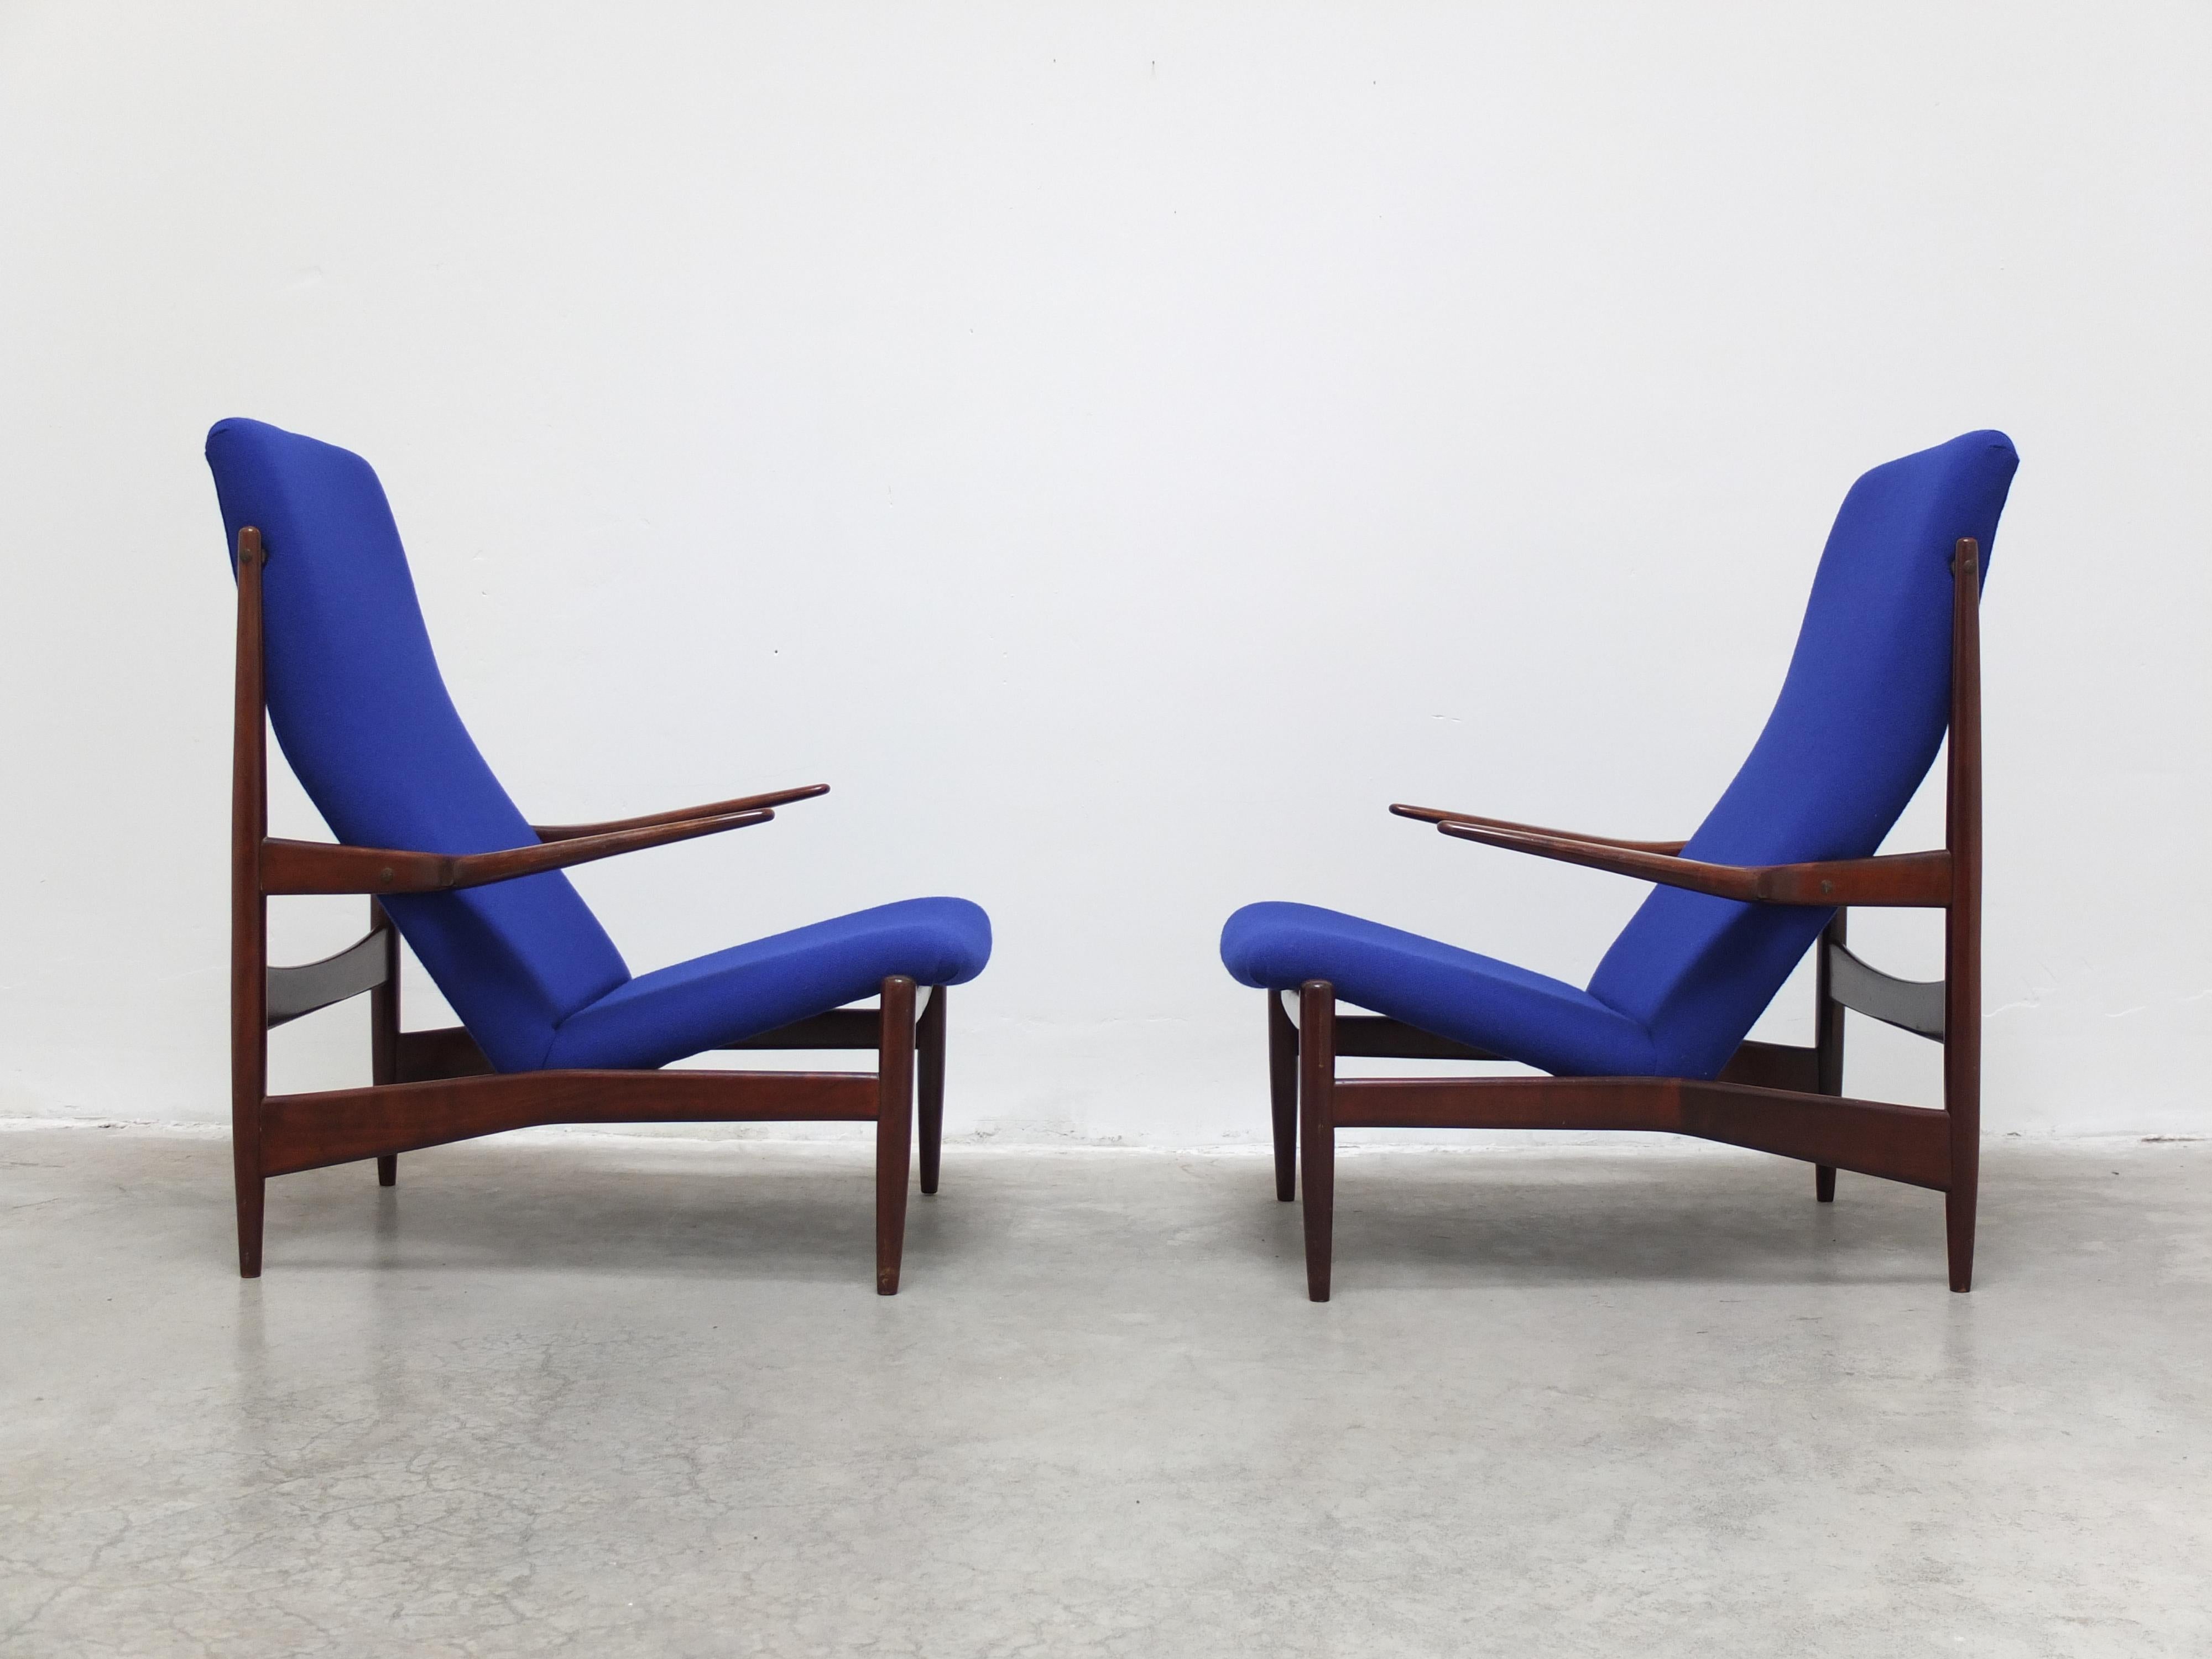 An exceptional and beautiful pair of lounge chairs designed by Alfred Hendrickx for the Expo of 1958 in Brussels. They feature an elegant walnut frame with floating armrests and brass details. Produced around 1958 by Belform. Reupholstered with a